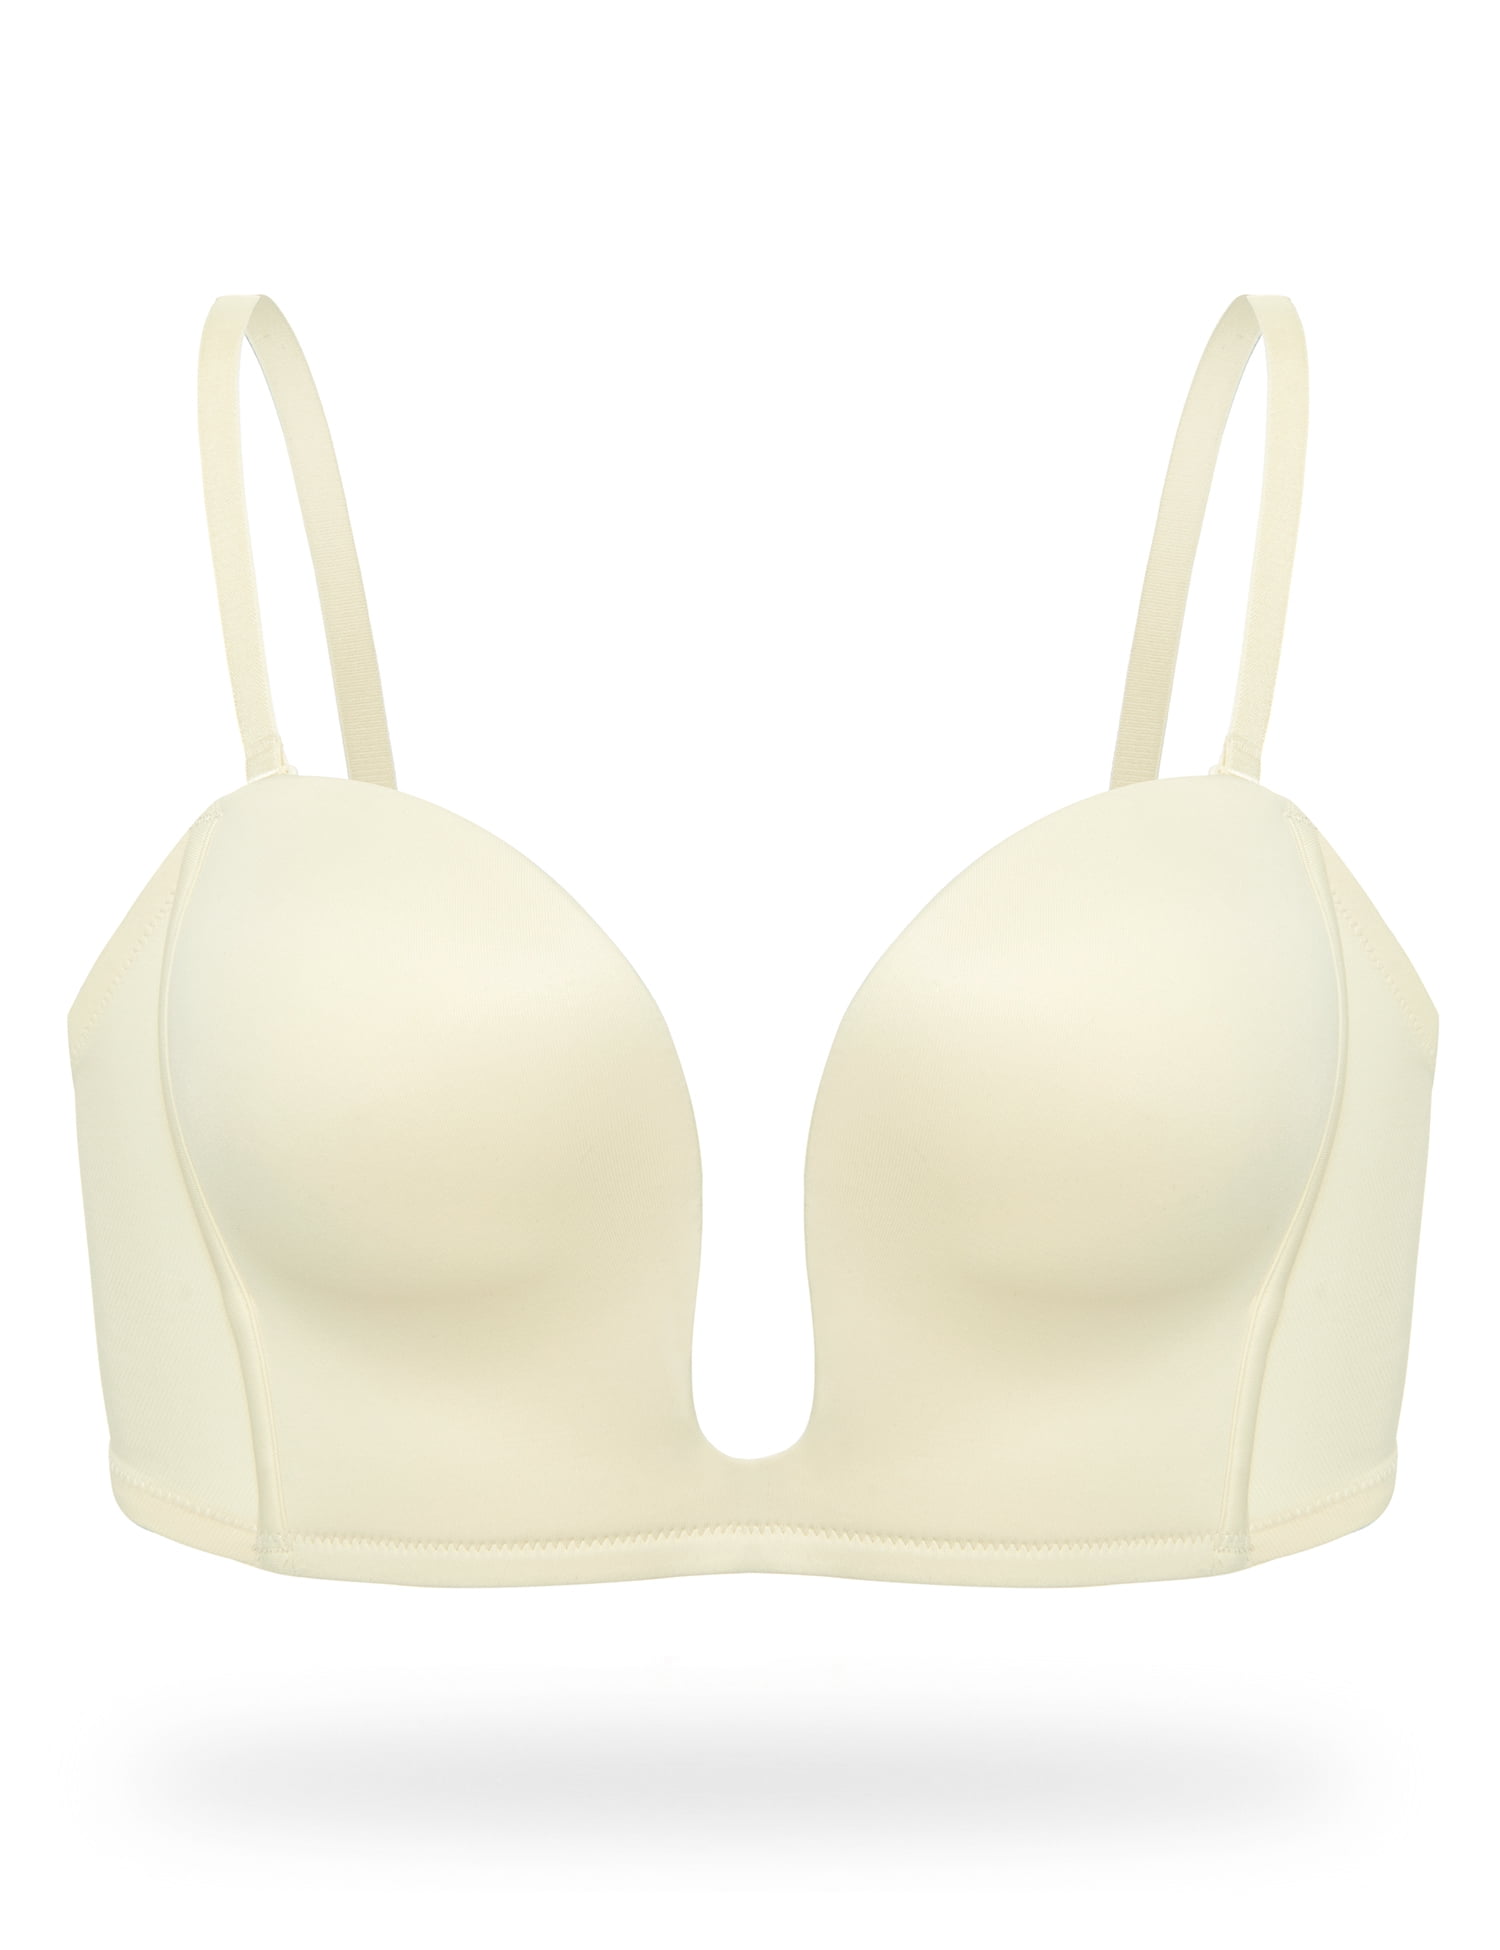 Buy DEMILI Women's Convertible Deep V Bras Push Up Padded Low Cut Multiway  Underwire Plunge Bra with Clear Strap White, Clear, 38C at